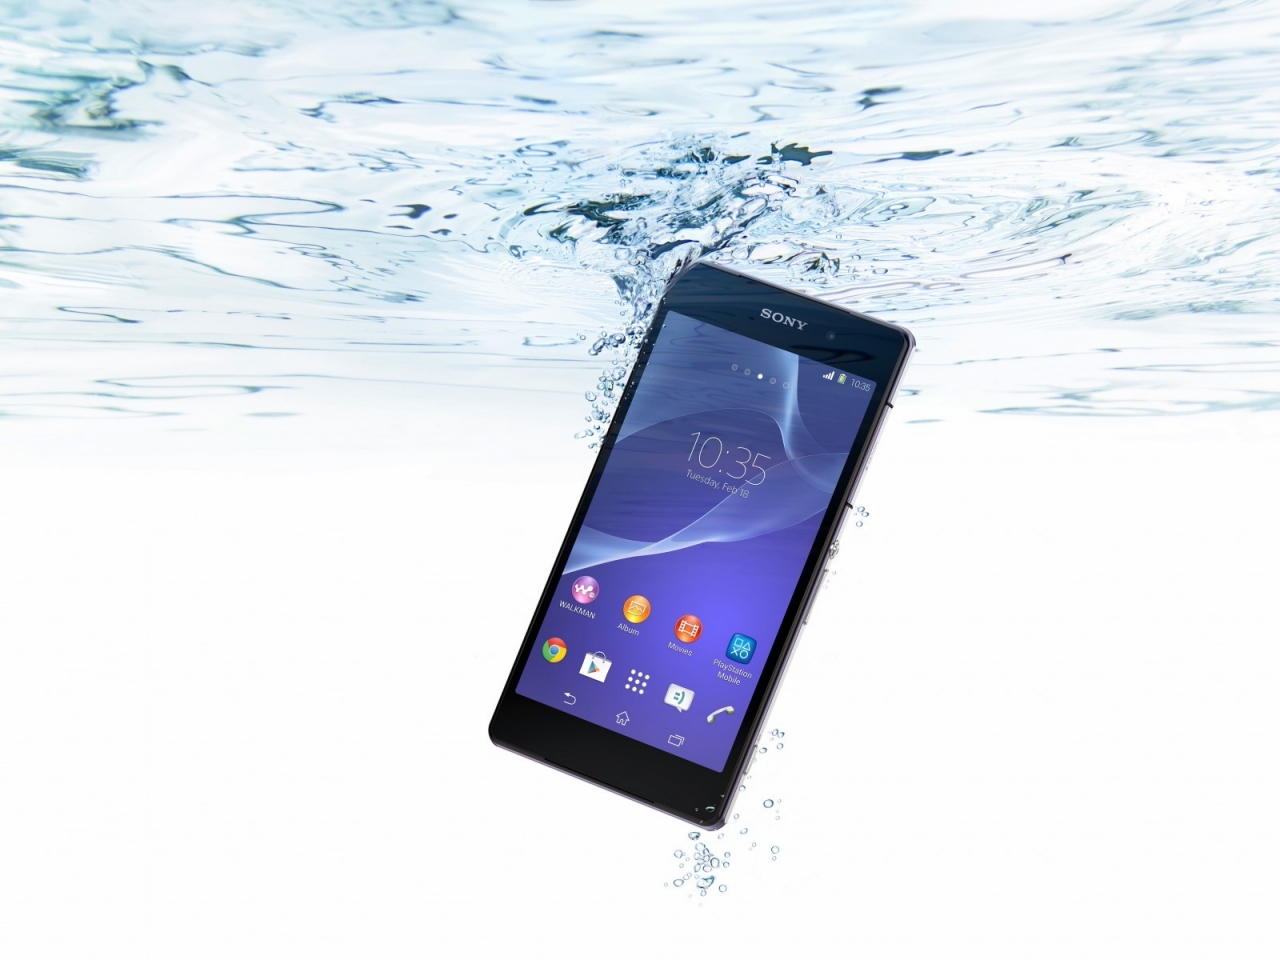 Sony Xperia Z2 Waterproof for 1280 x 960 resolution